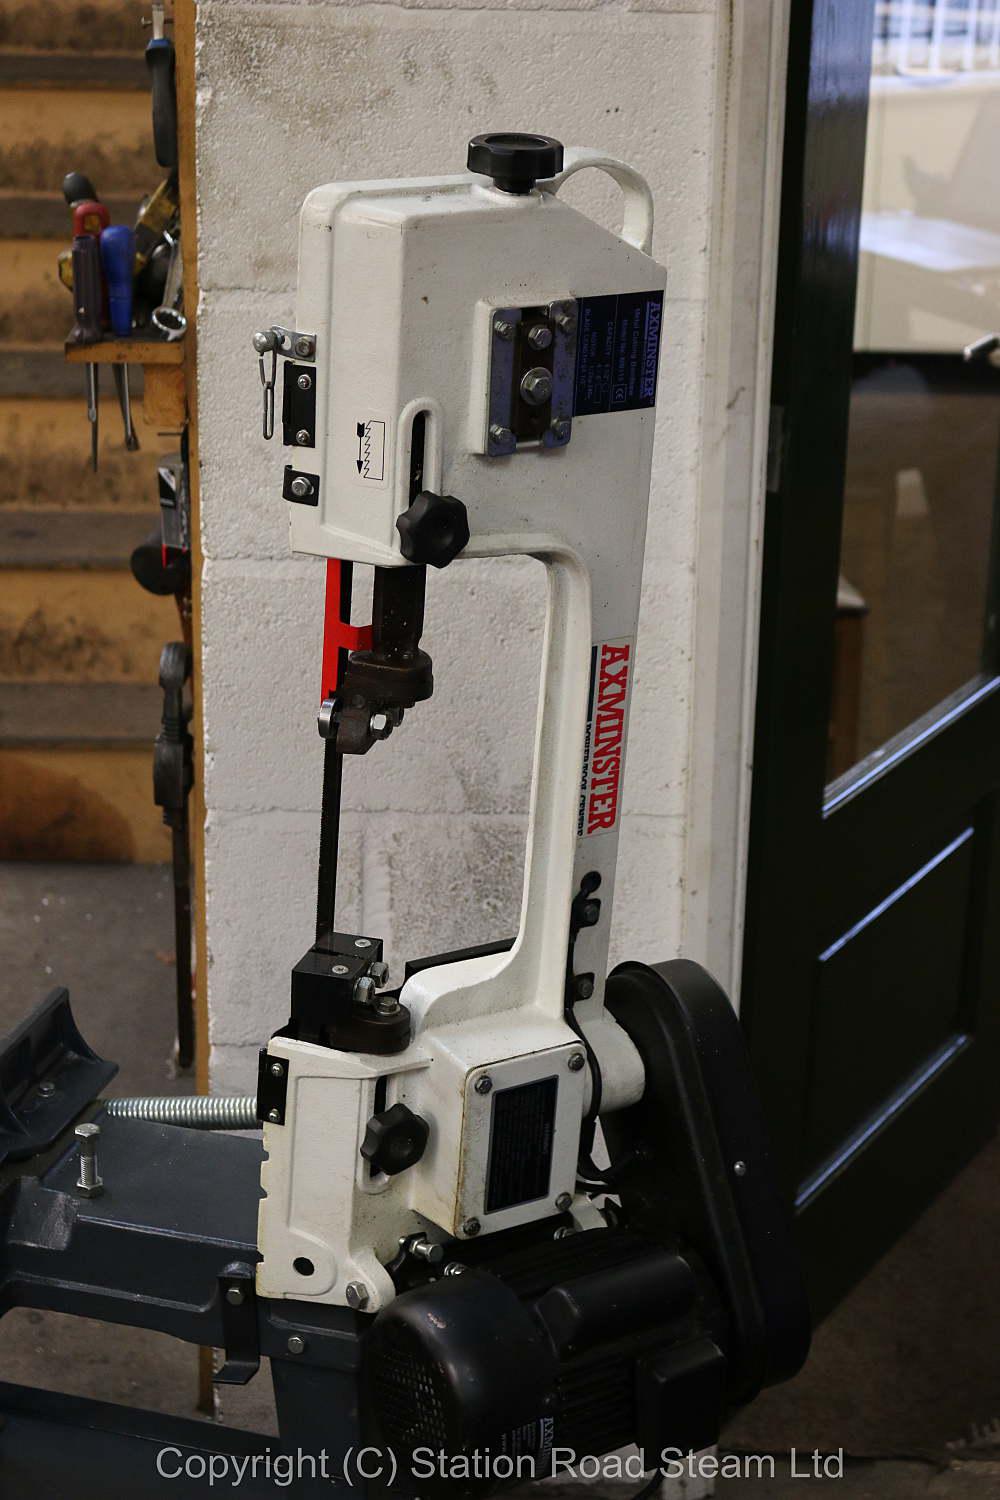 Axminster Power Tools bandsaw